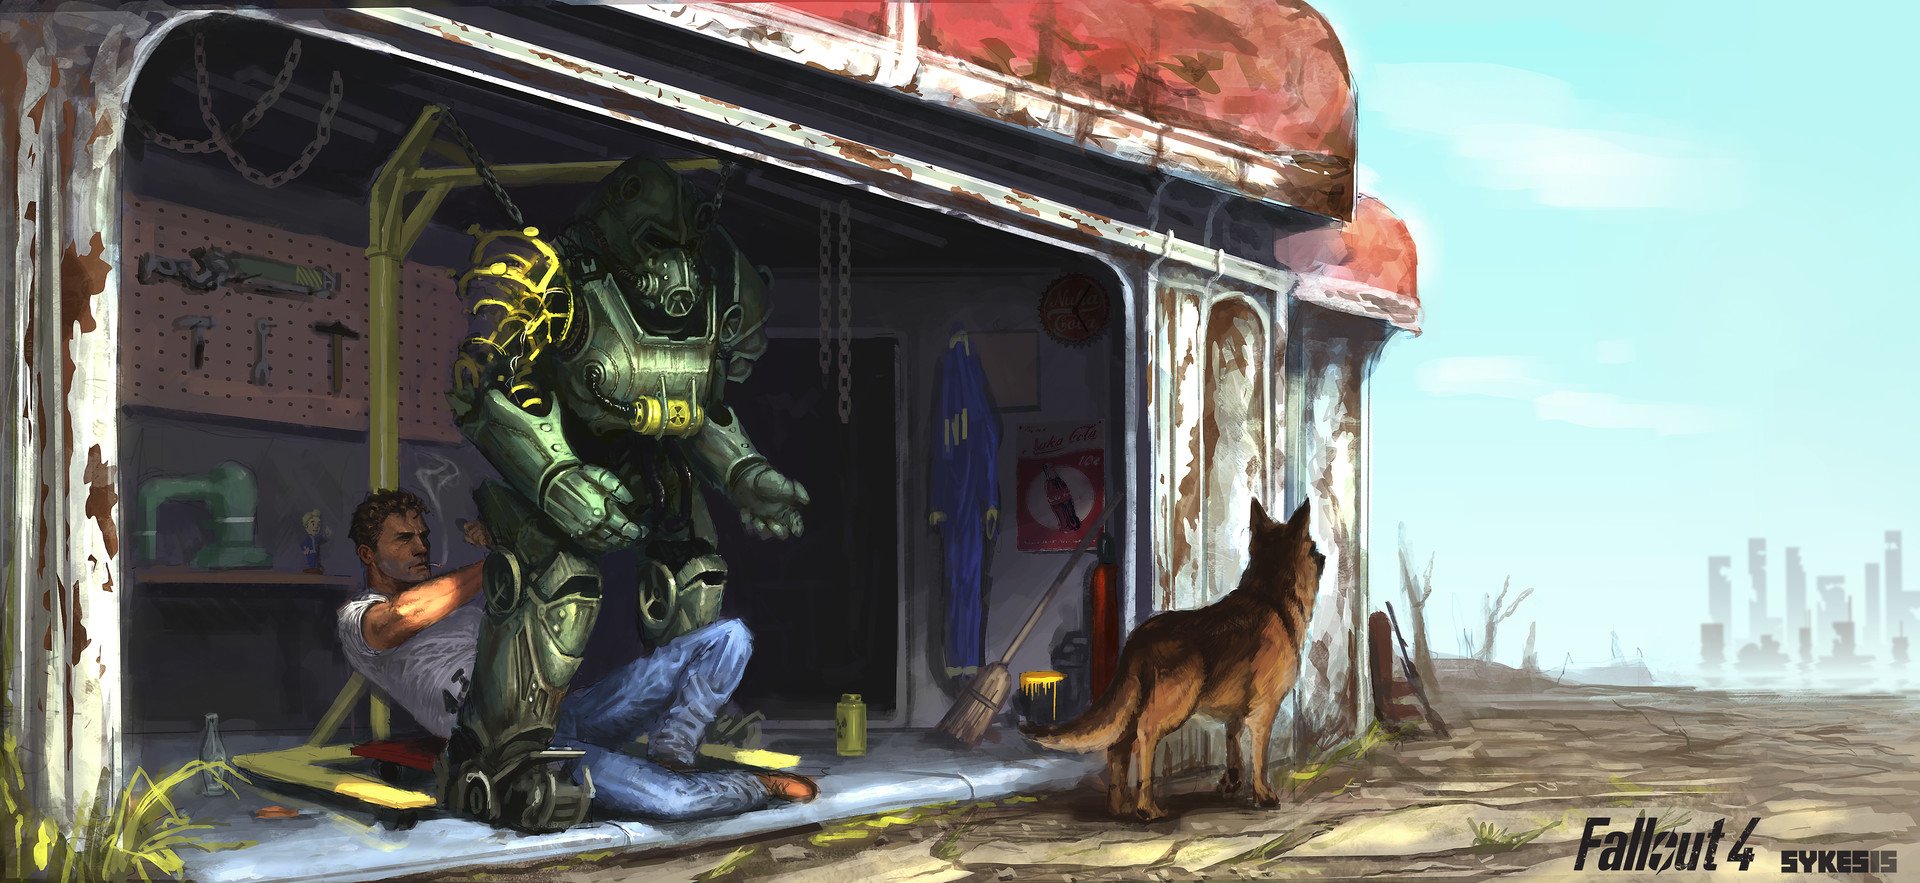 Fallout 4 epic game фото 21